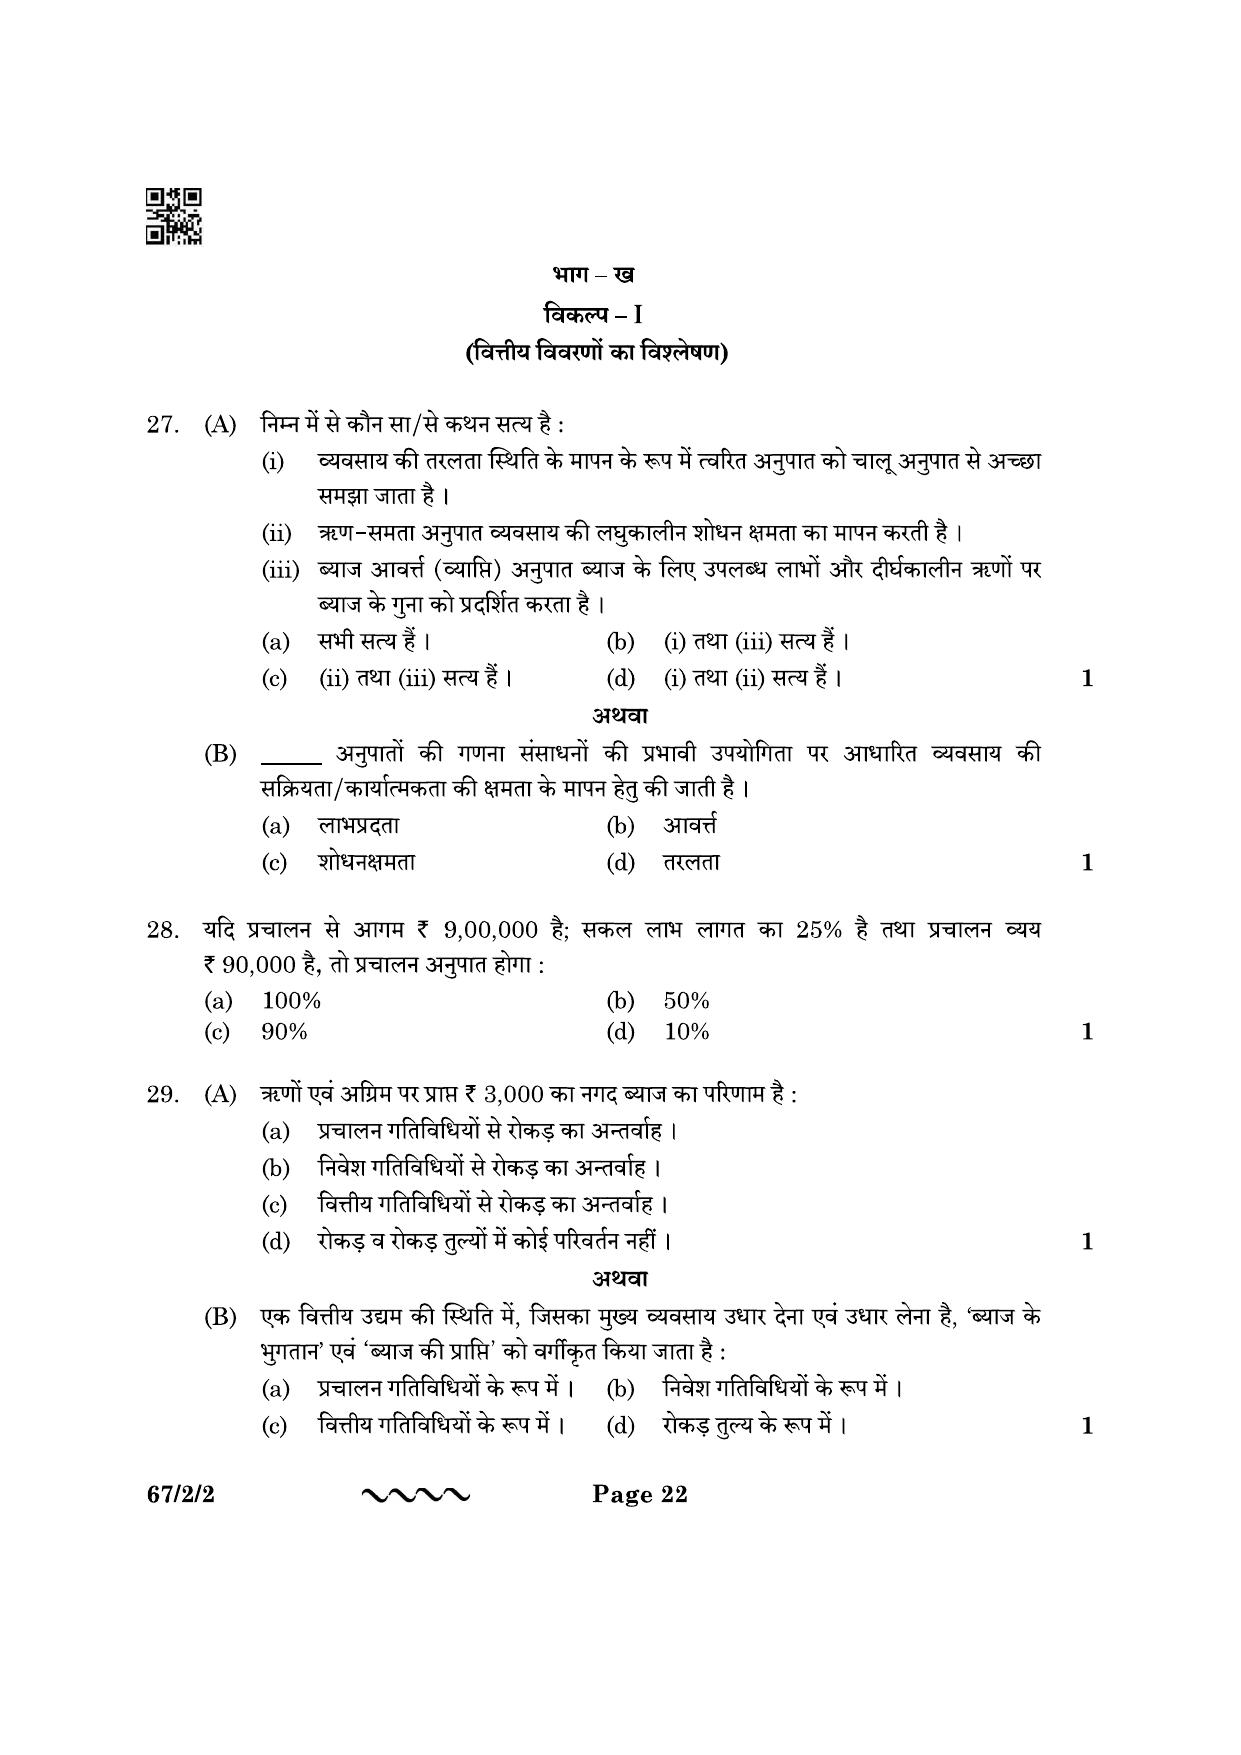 CBSE Class 12 67-2-2 Accountancy 2023 Question Paper - Page 22